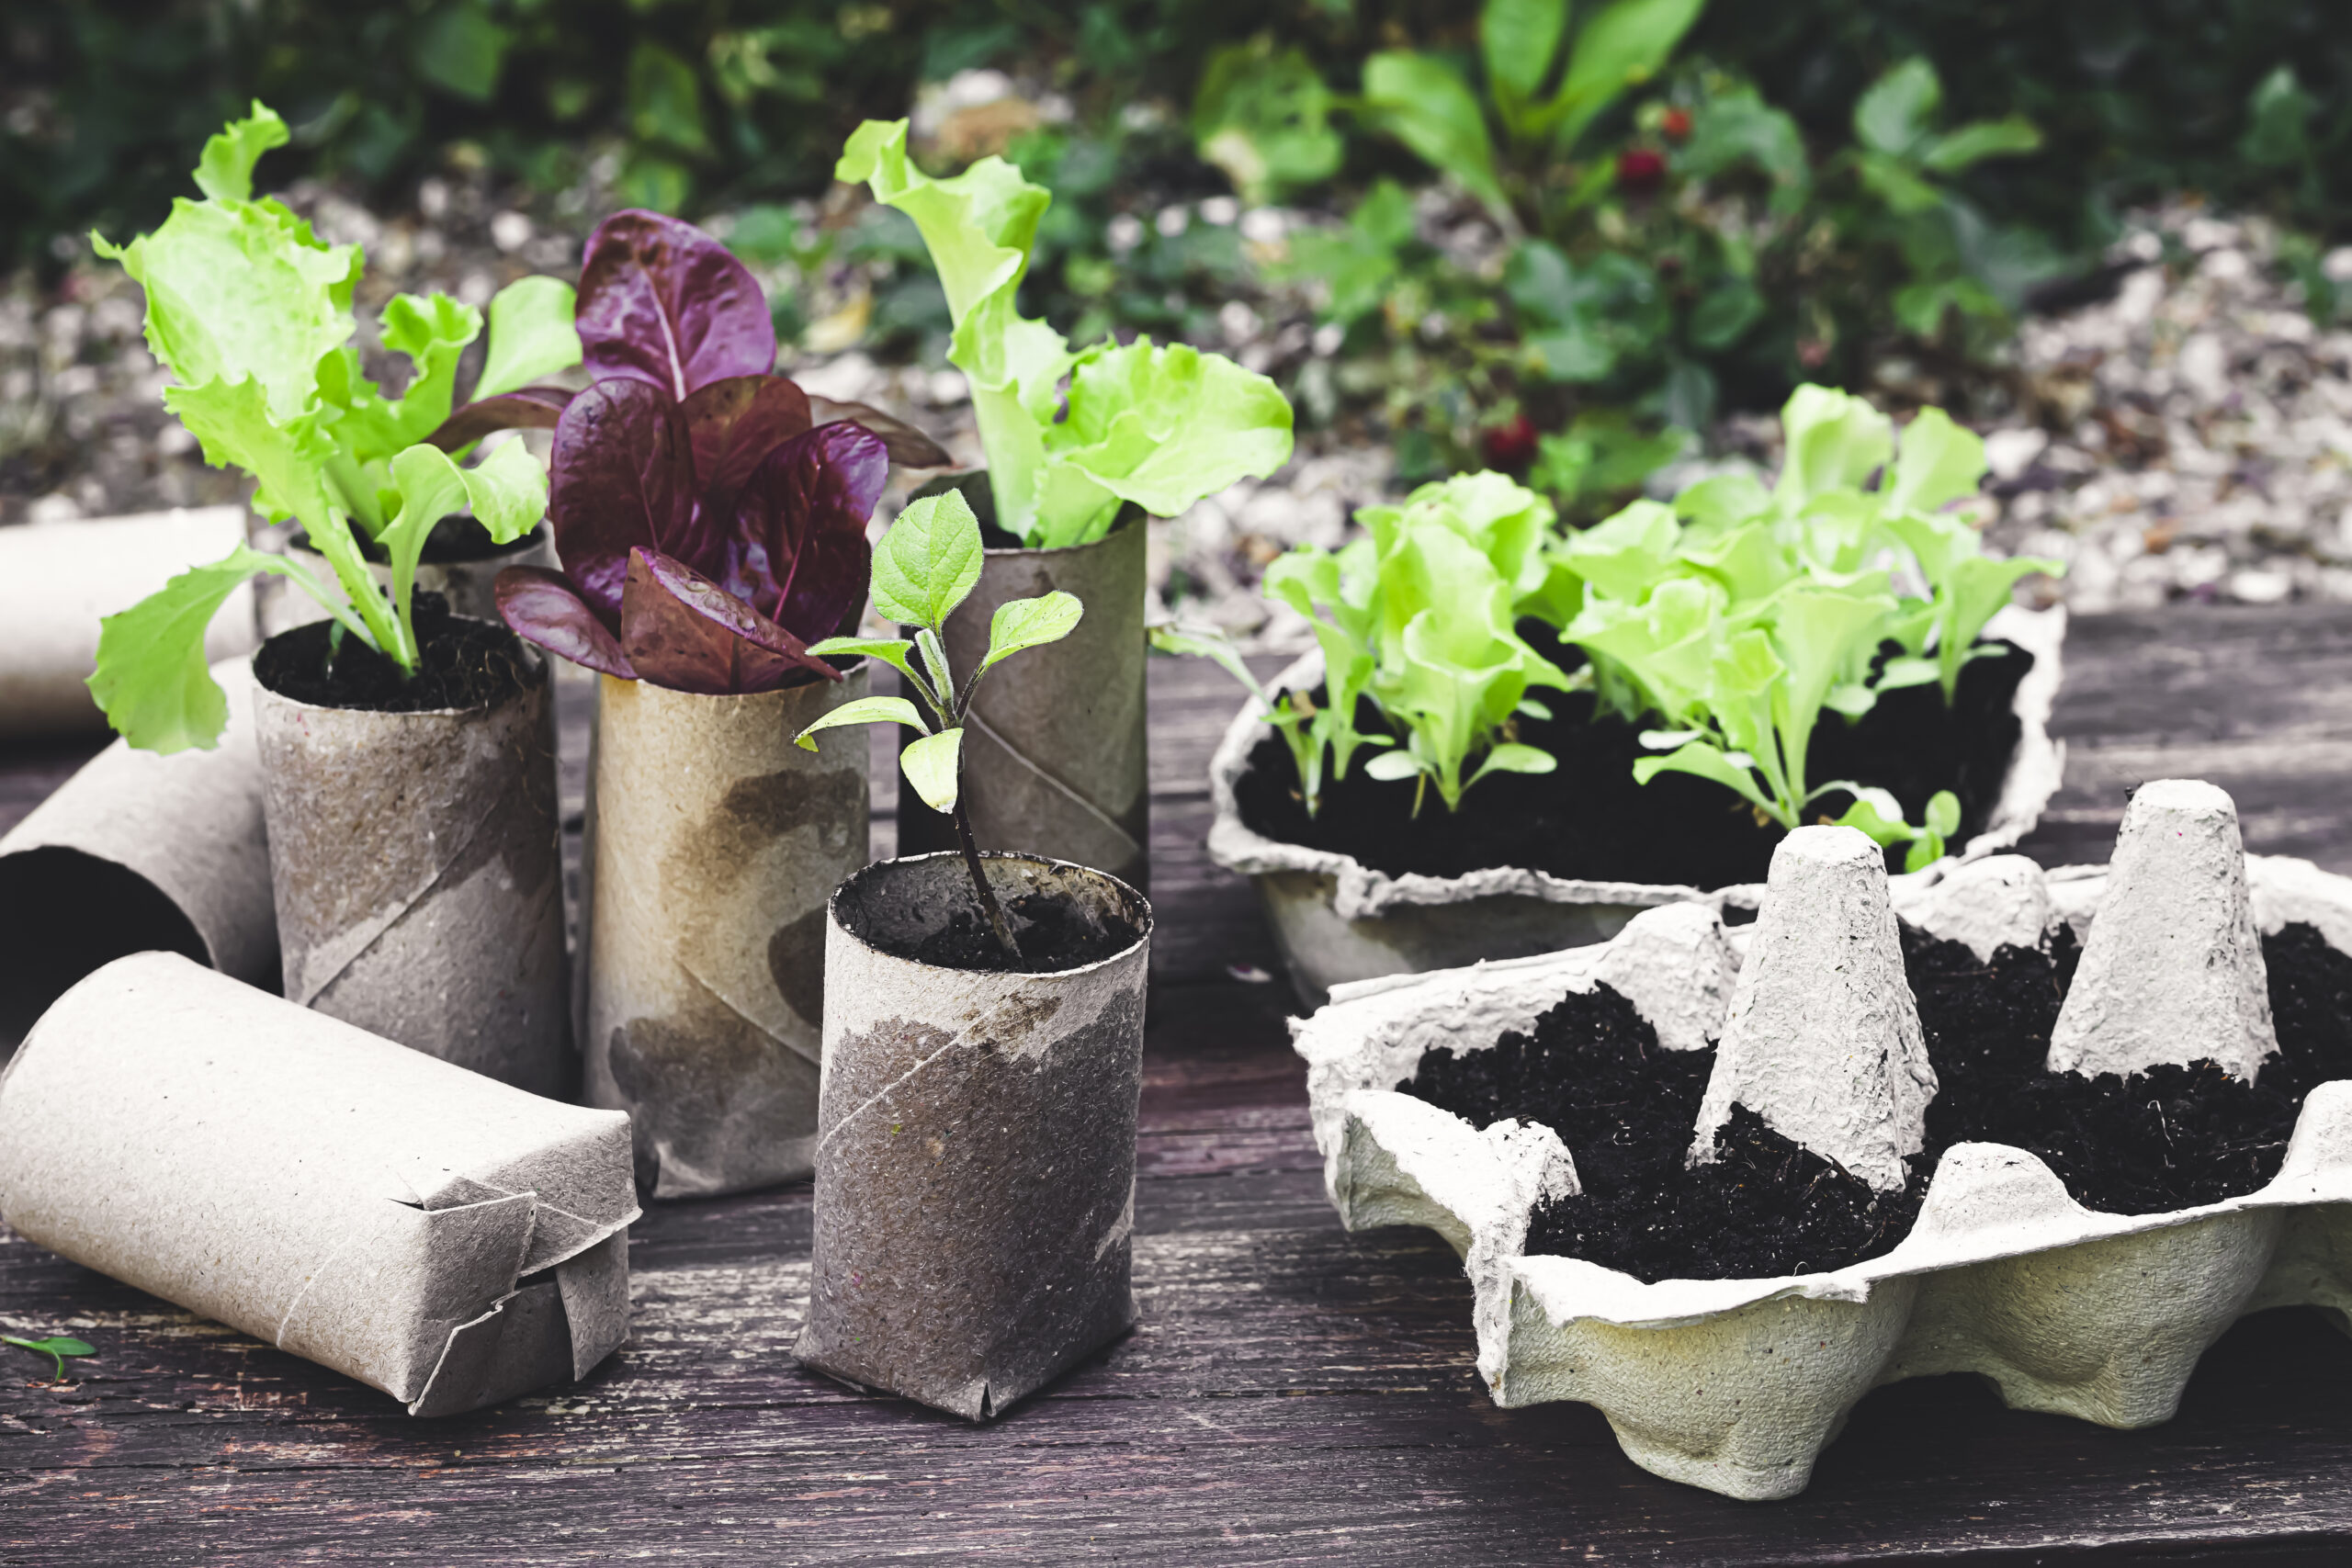 biodegradable pots with seedlings